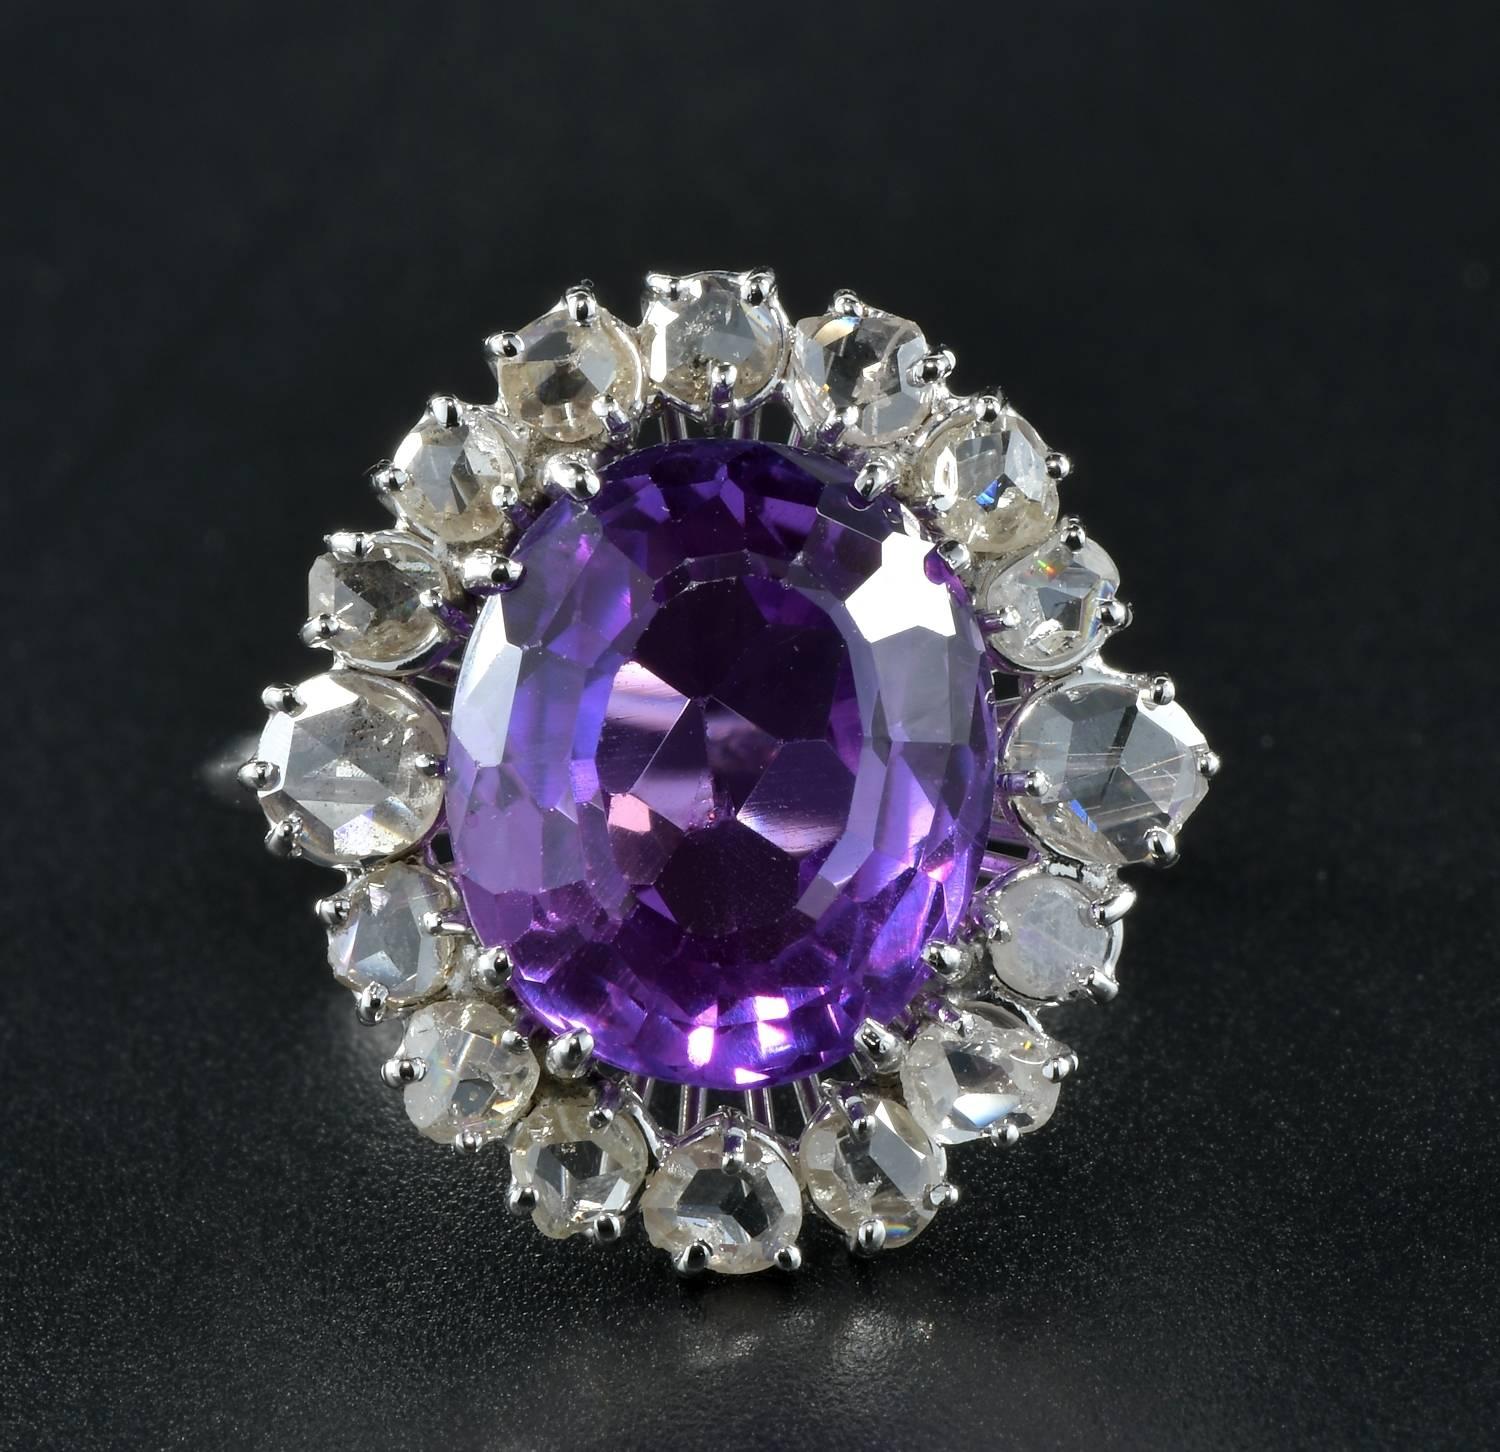 Rare large sized 100% Natural Sapphire untreated no heat Purplish with a pinkish hue to it.
Estimate on mounting 11.45 Ct (measuring 14.01 mm. x 11.91 mm.). Stunning antique example!
Complemented by 16 rose cut Diamonds of fine quality totalling